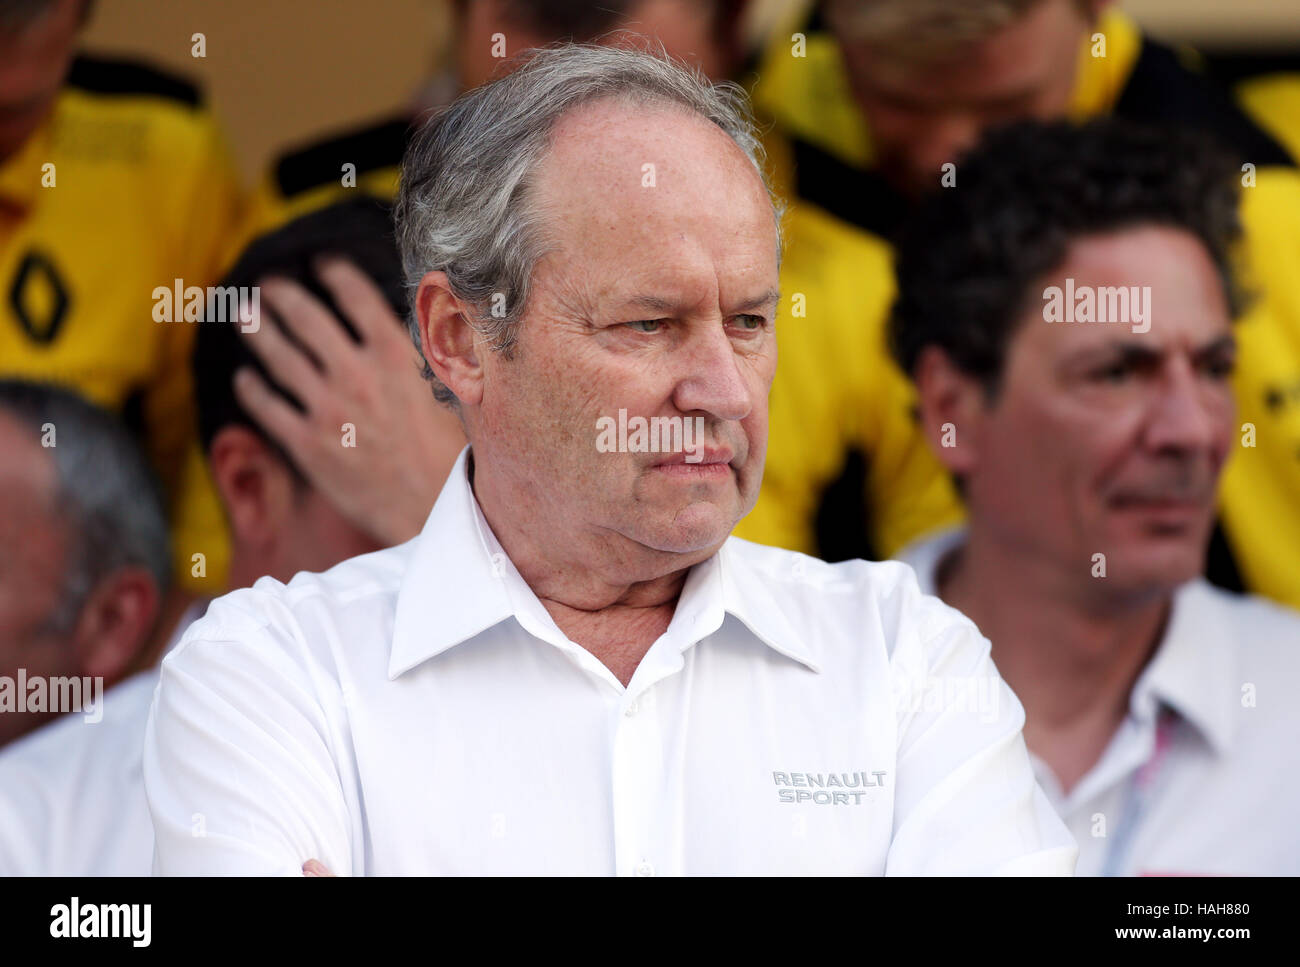 Frederic Vasseur Renault Sport F1 Team Racing Director during the Abu Dhabi Grand Prix at the Yas Marina Circuit, Abu Dhabi. PRESS ASSOCIATION Photo. Picture date: Sunday November 27, 2016. See PA story AUTO Abu Dhabi. Photo credit should read: David Davies/PA Wire. Stock Photo